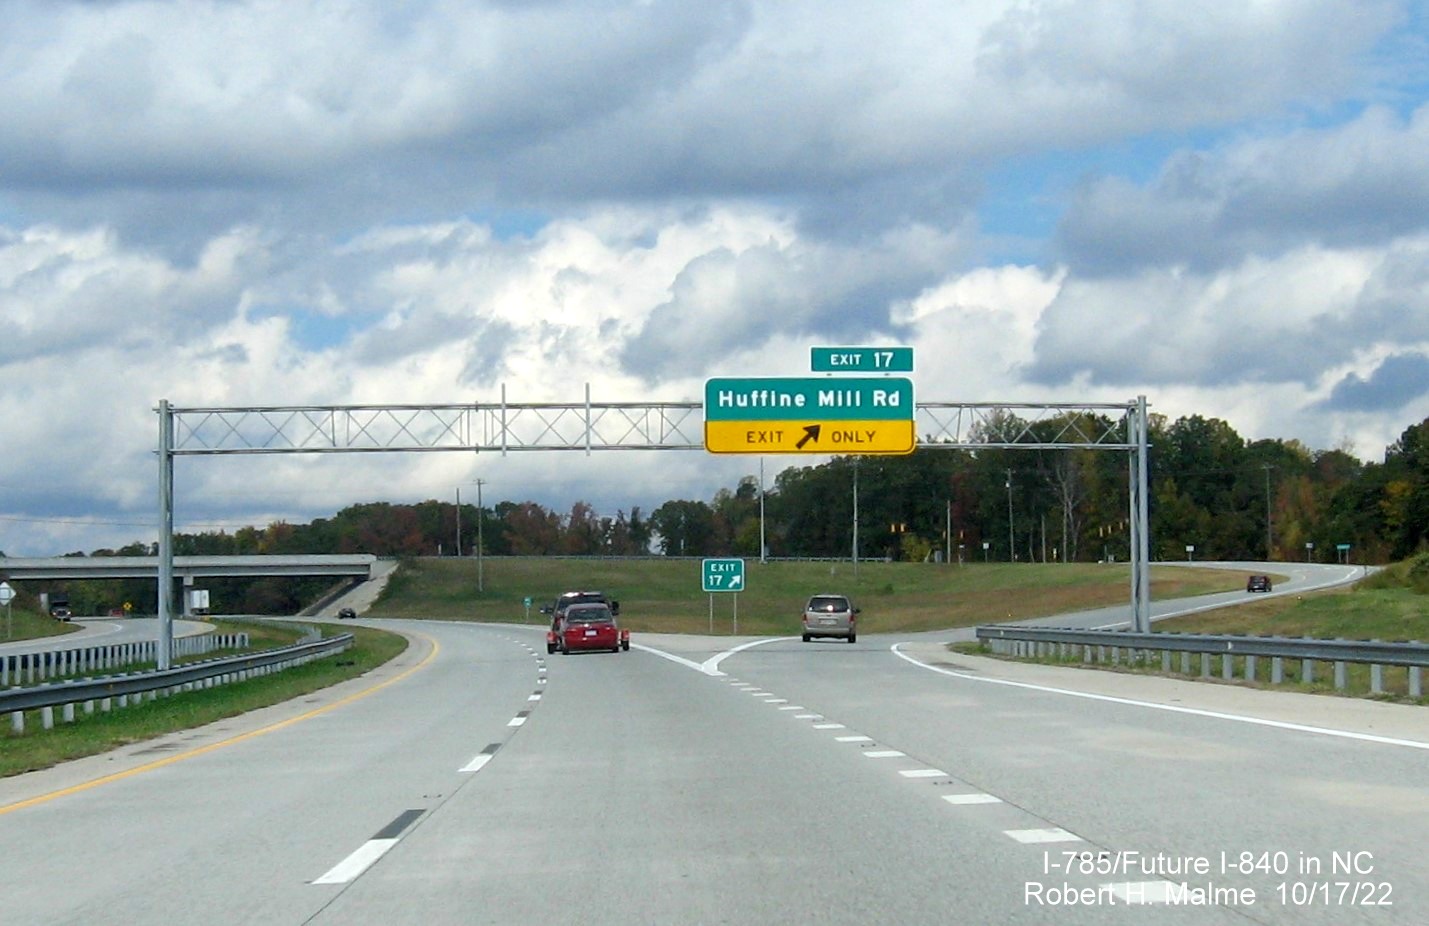 Image of overhead ramp sign for Huffine Mill Road exit on I-785 North/Future I-840 West, Greensboro 
                  Urban Loop, October 2022